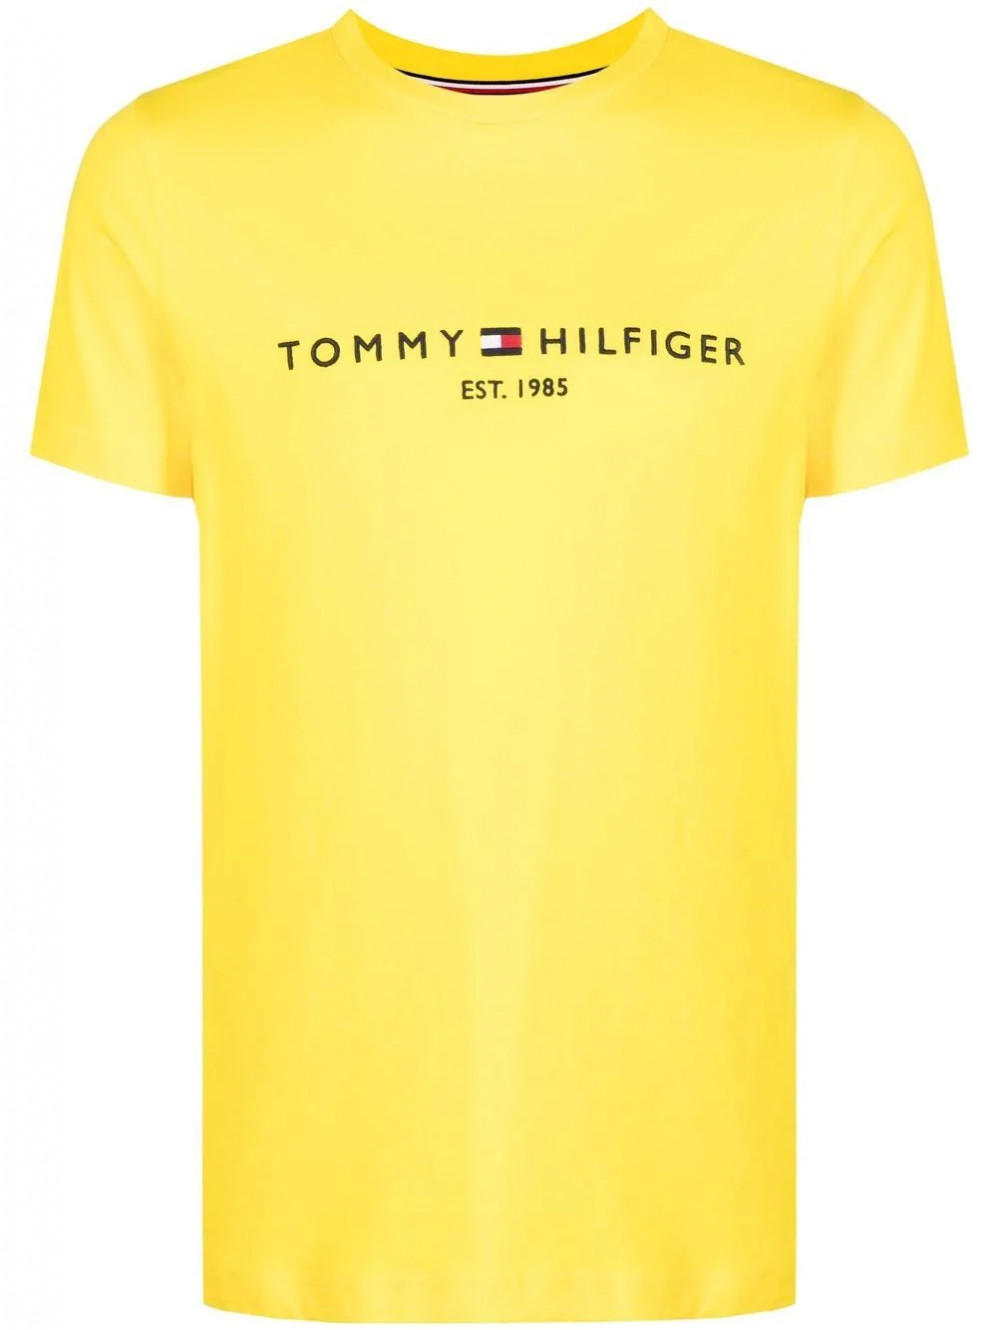 Tommy logo tee